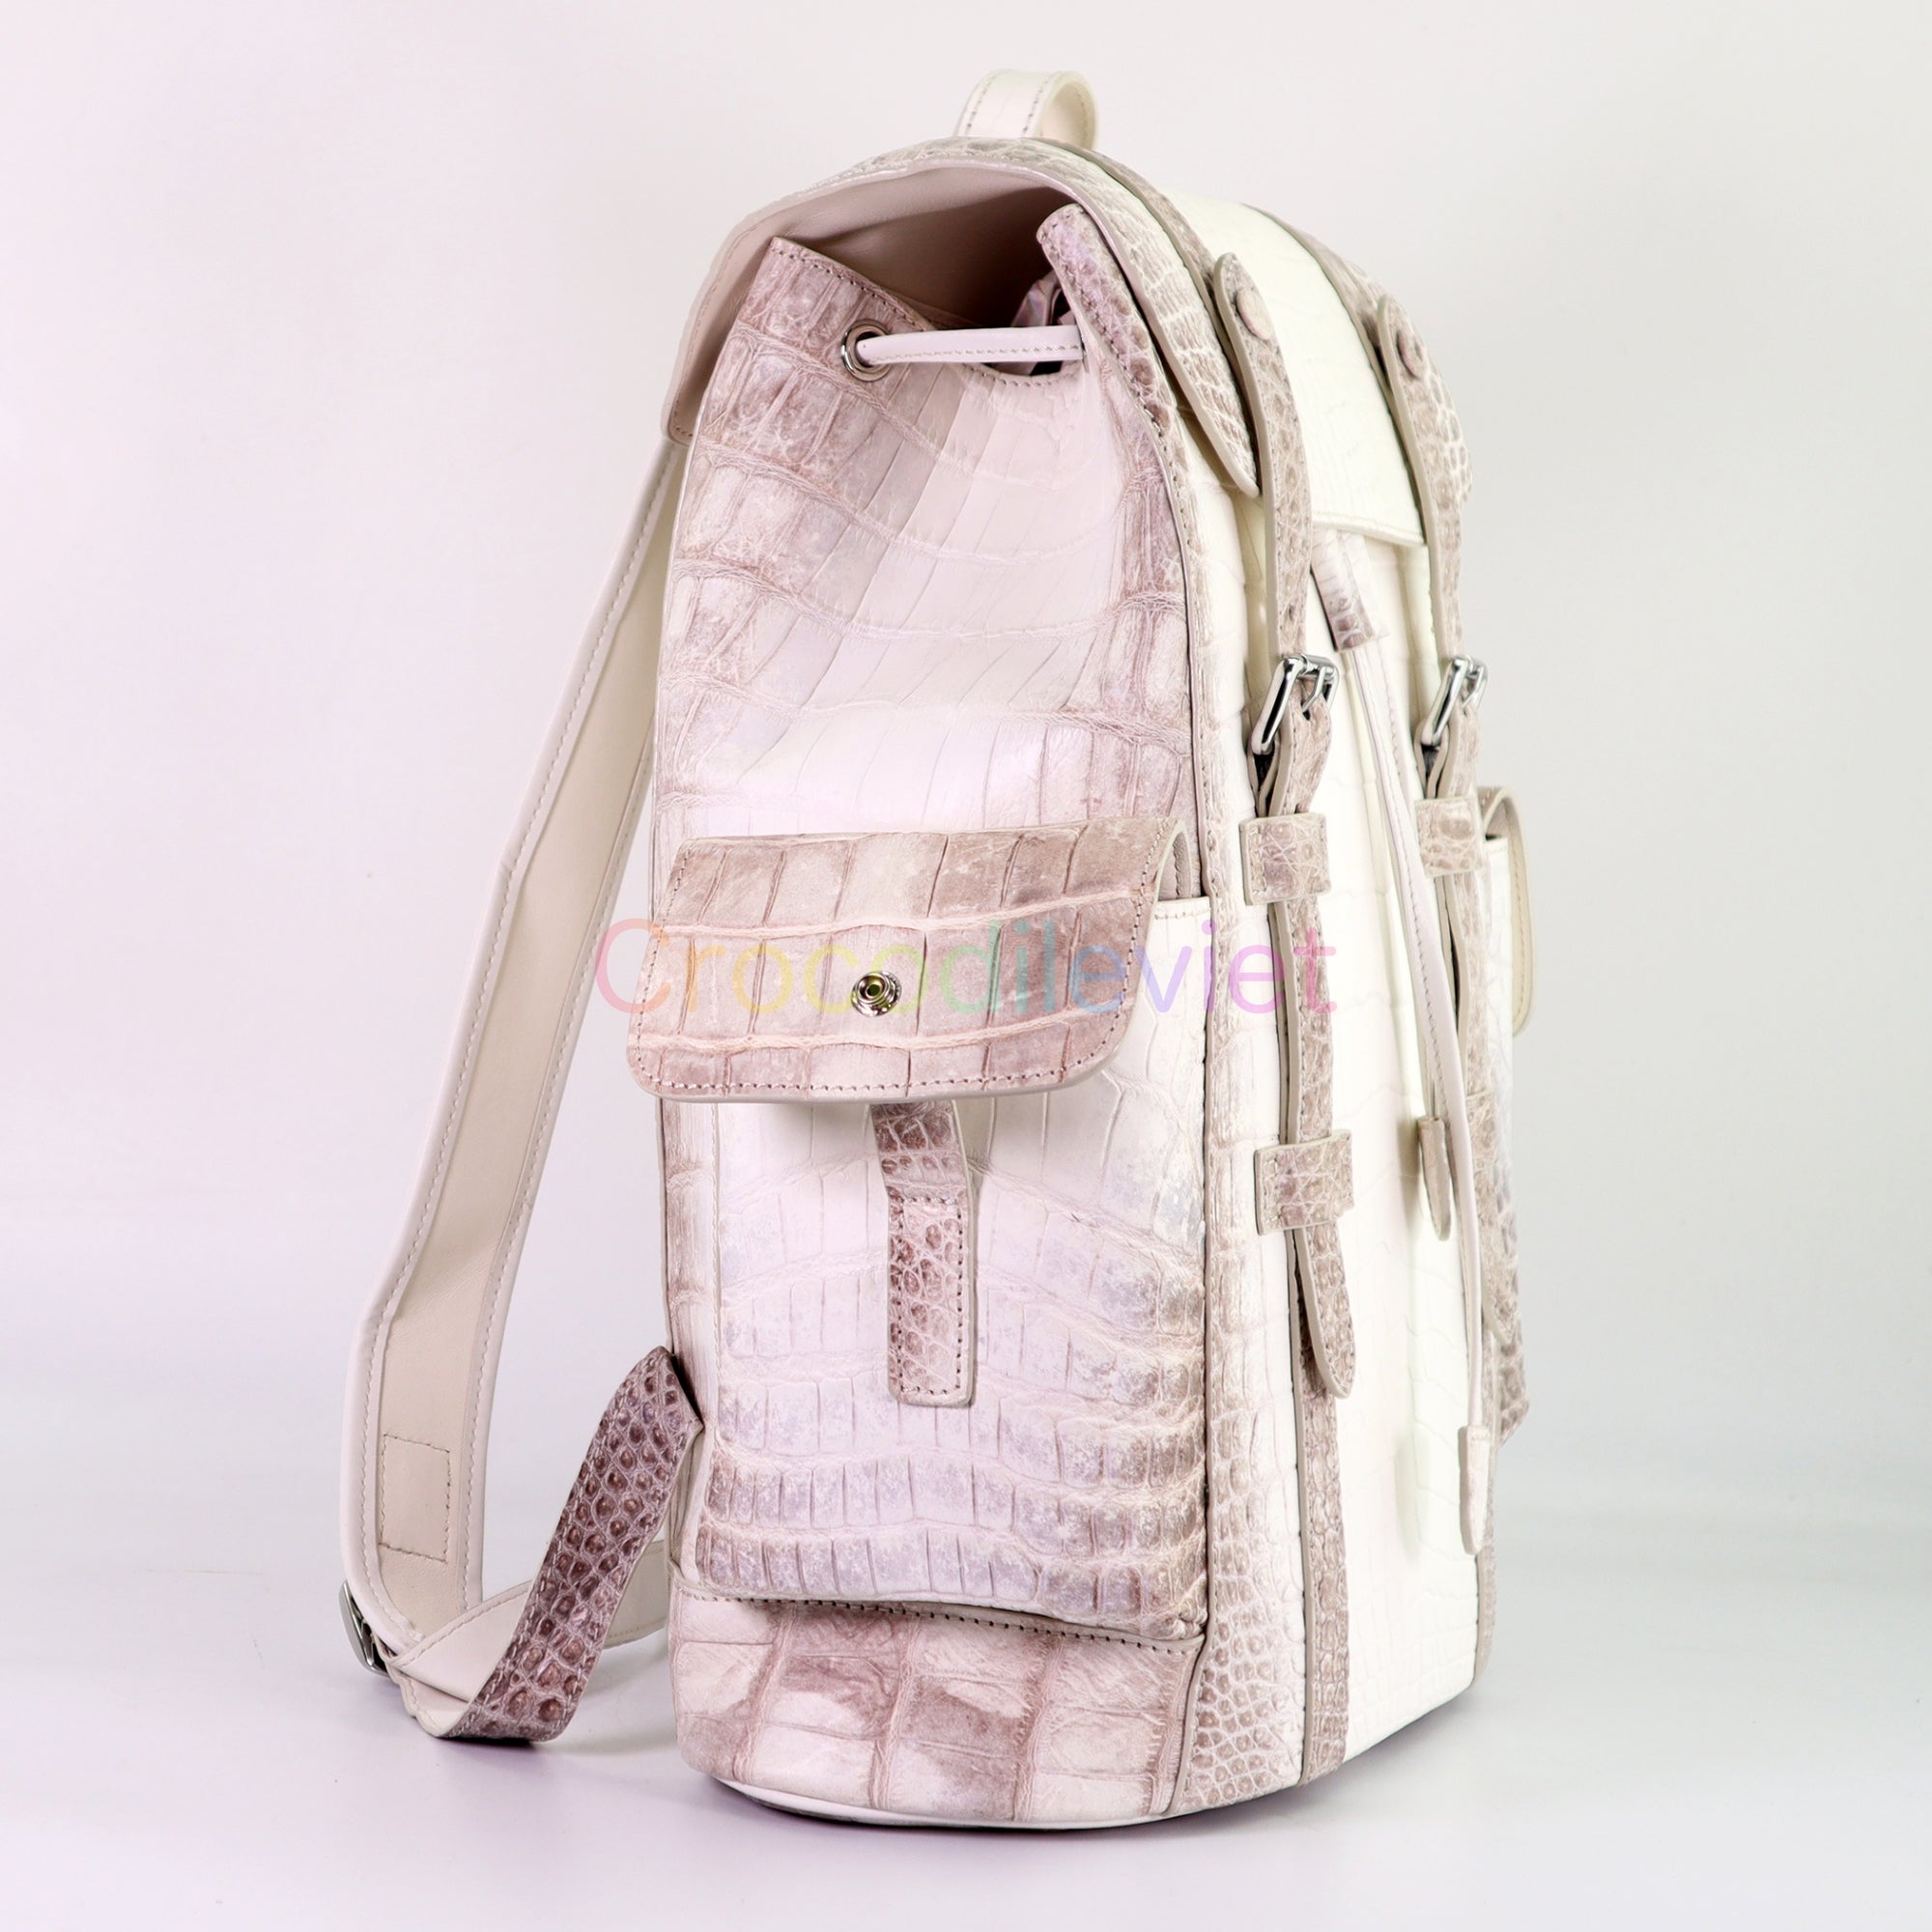 100% Real Leather Backpack, New Crocodile Pattern Travel Backpack Large  Rucksack